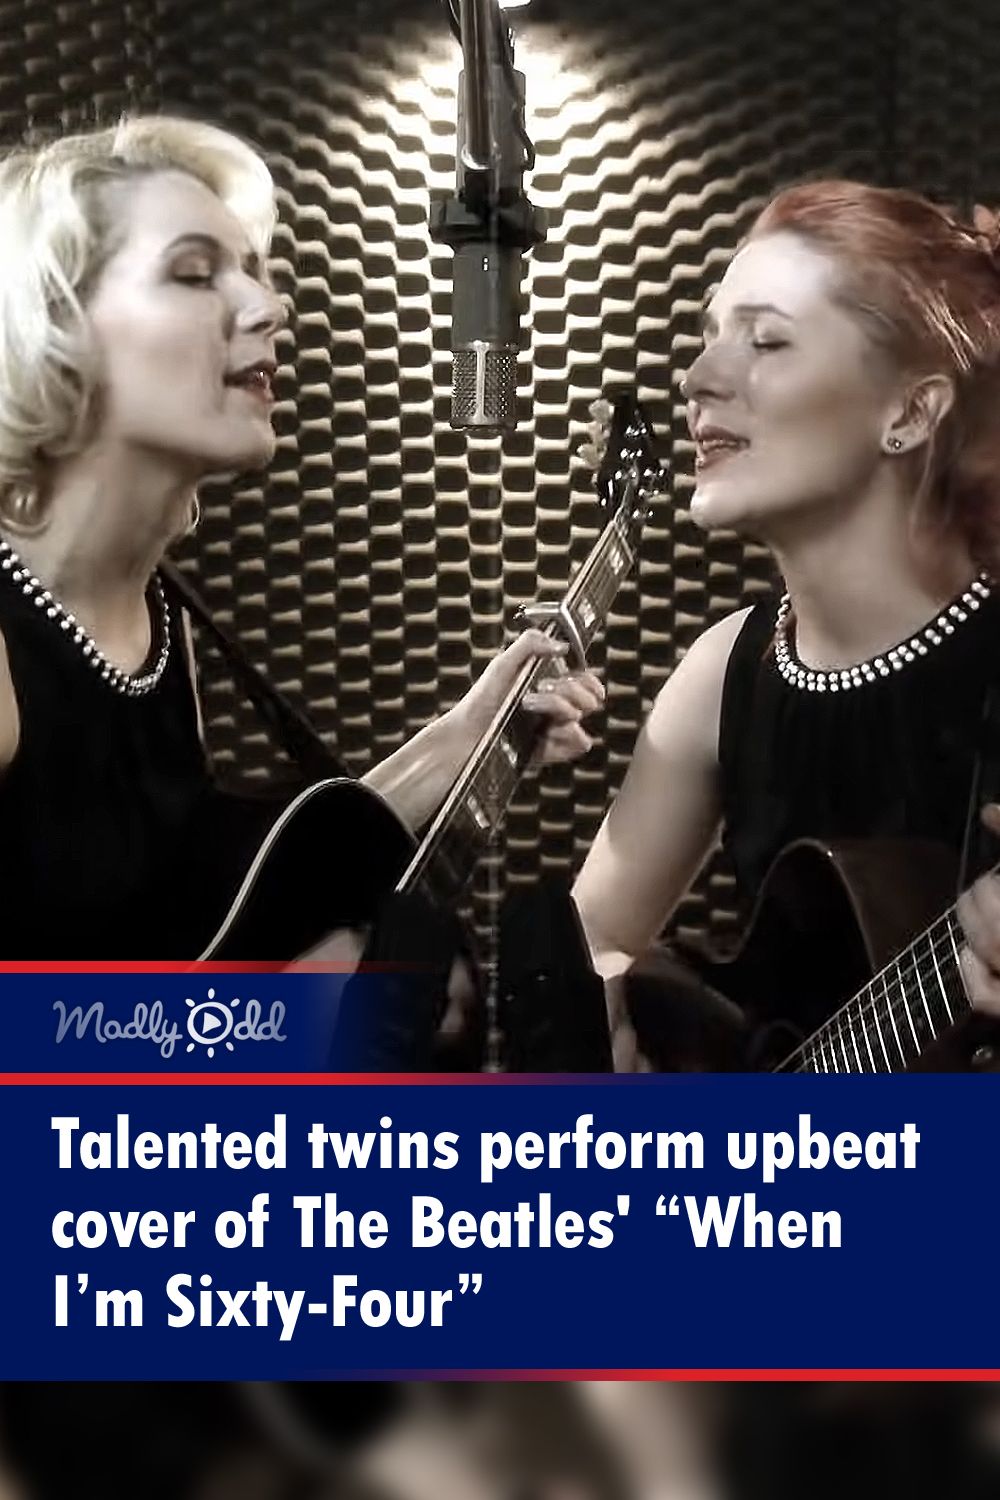 Talented twins perform upbeat cover of The Beatles\' “When I’m Sixty-Four”